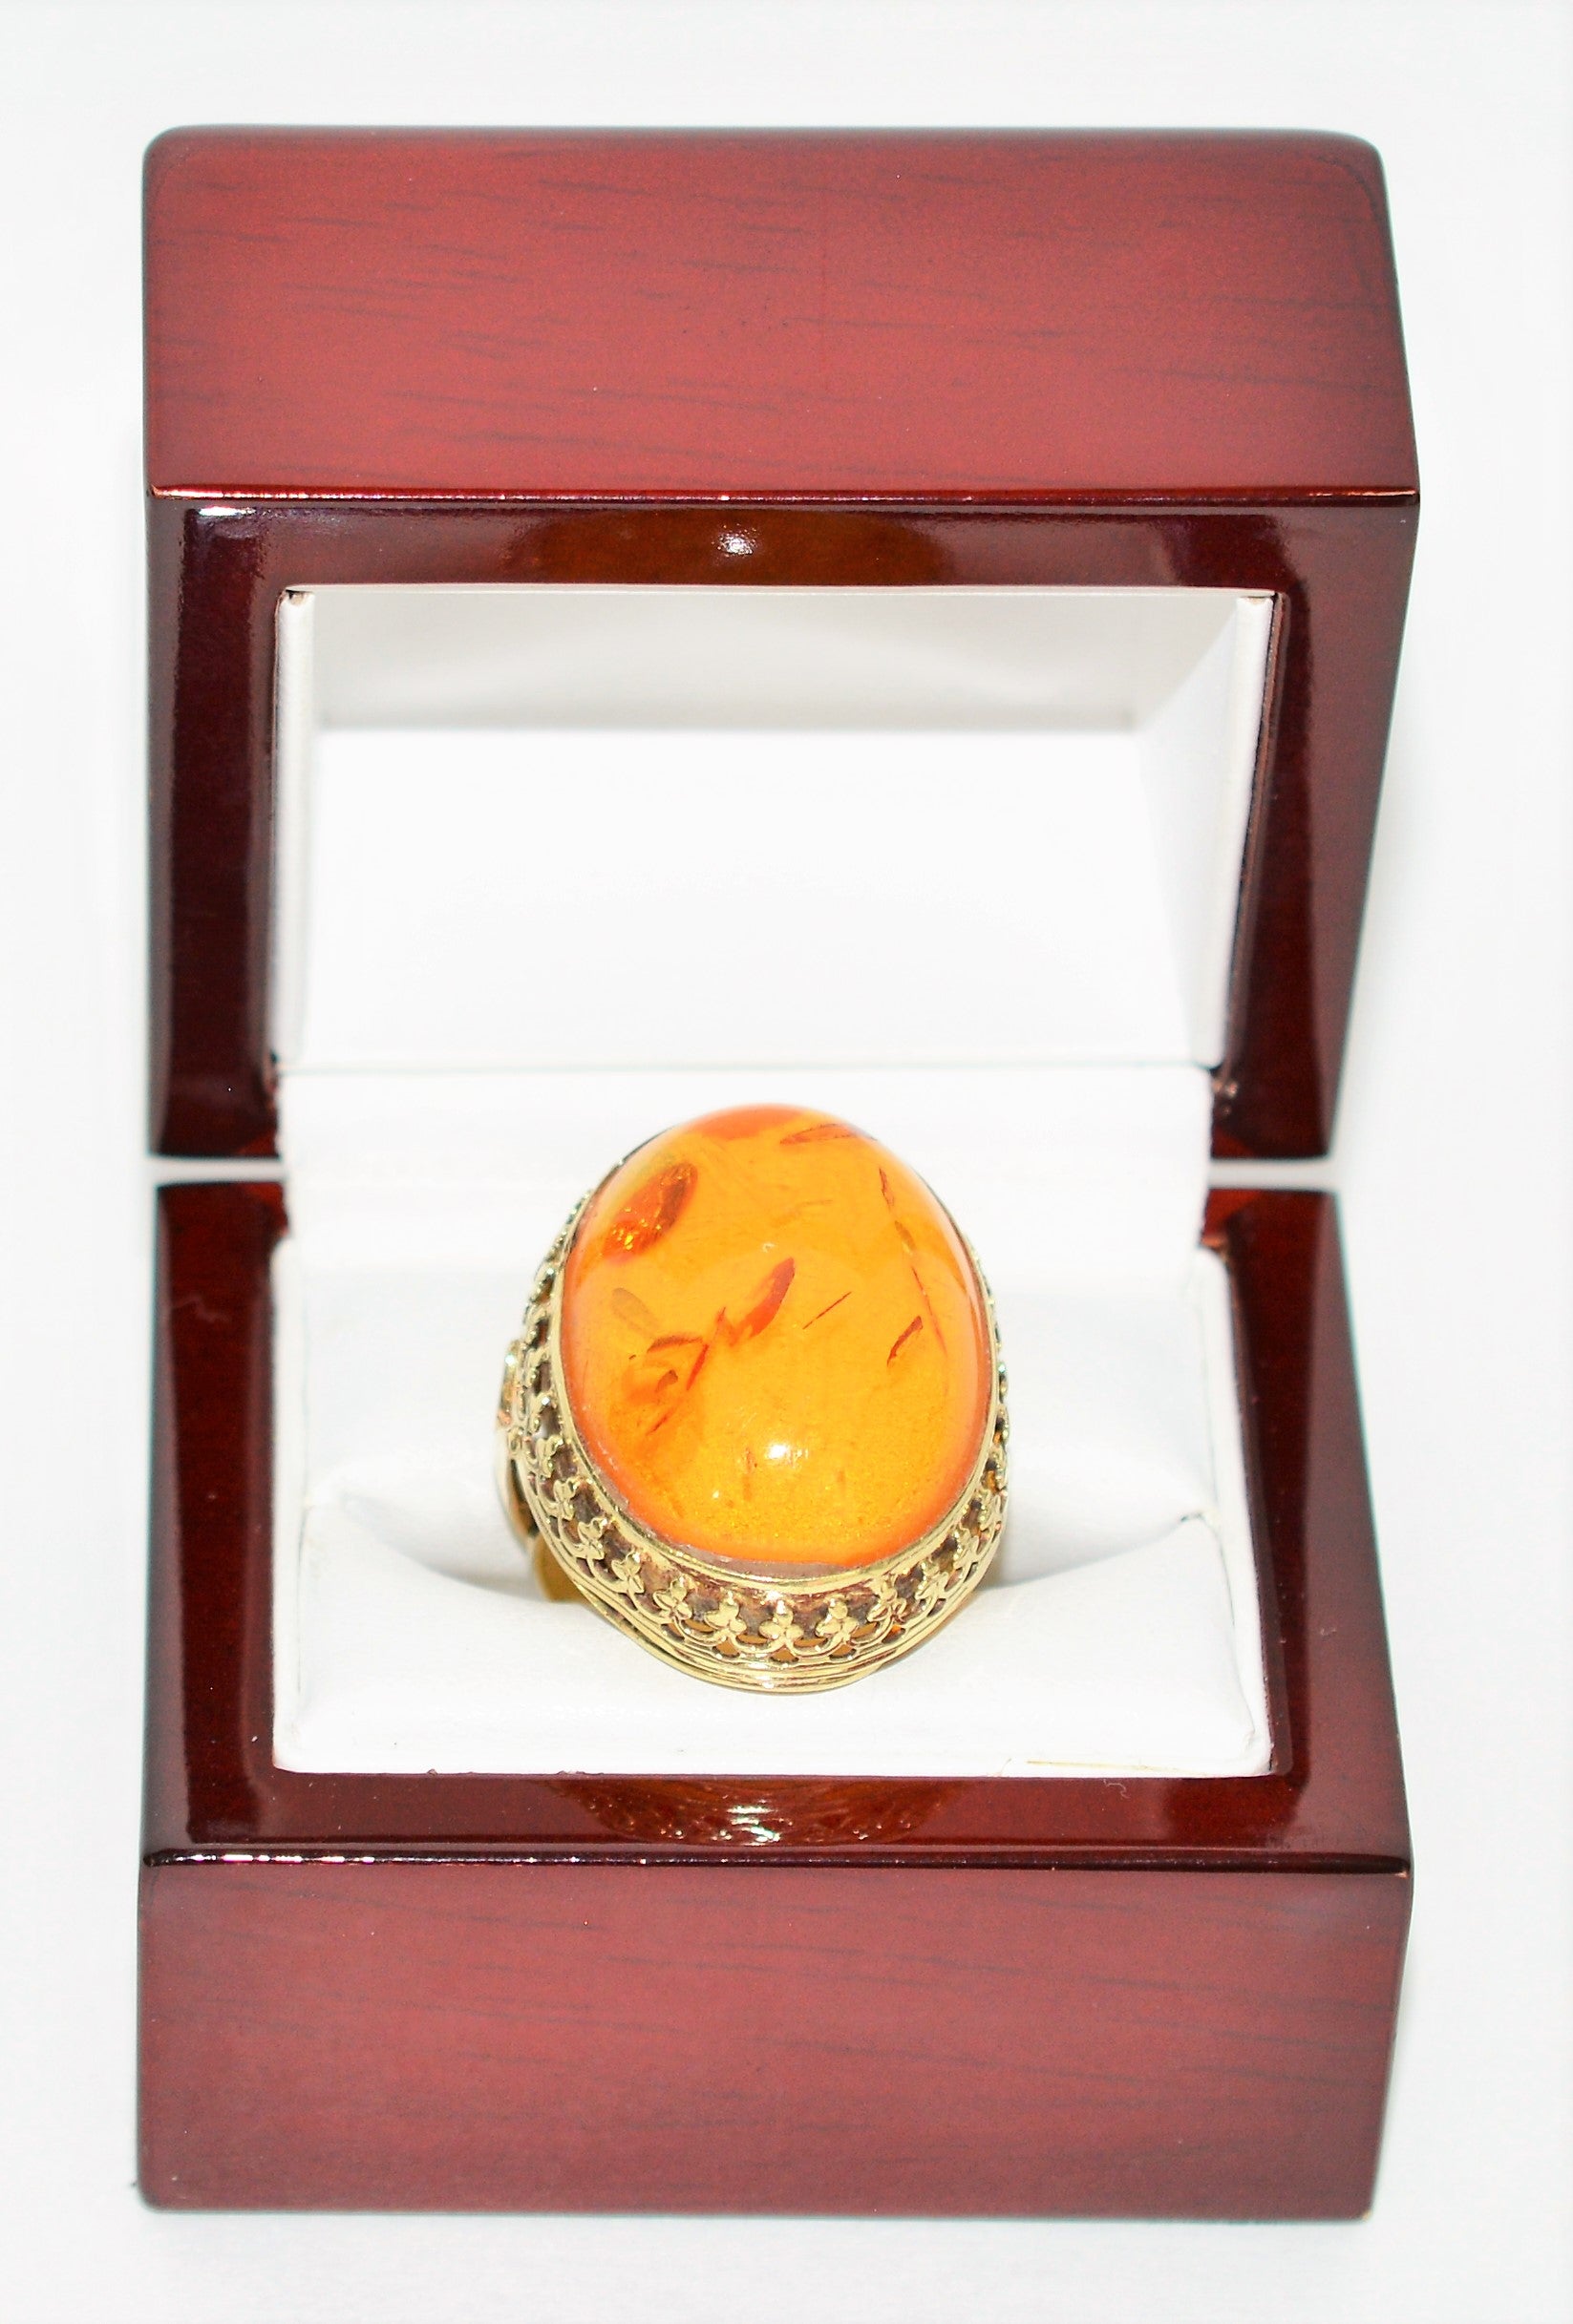 925 Sterling Silver Amber Bakelite Men's Ring Large Solid Unique Turkish  Jewelry | eBay